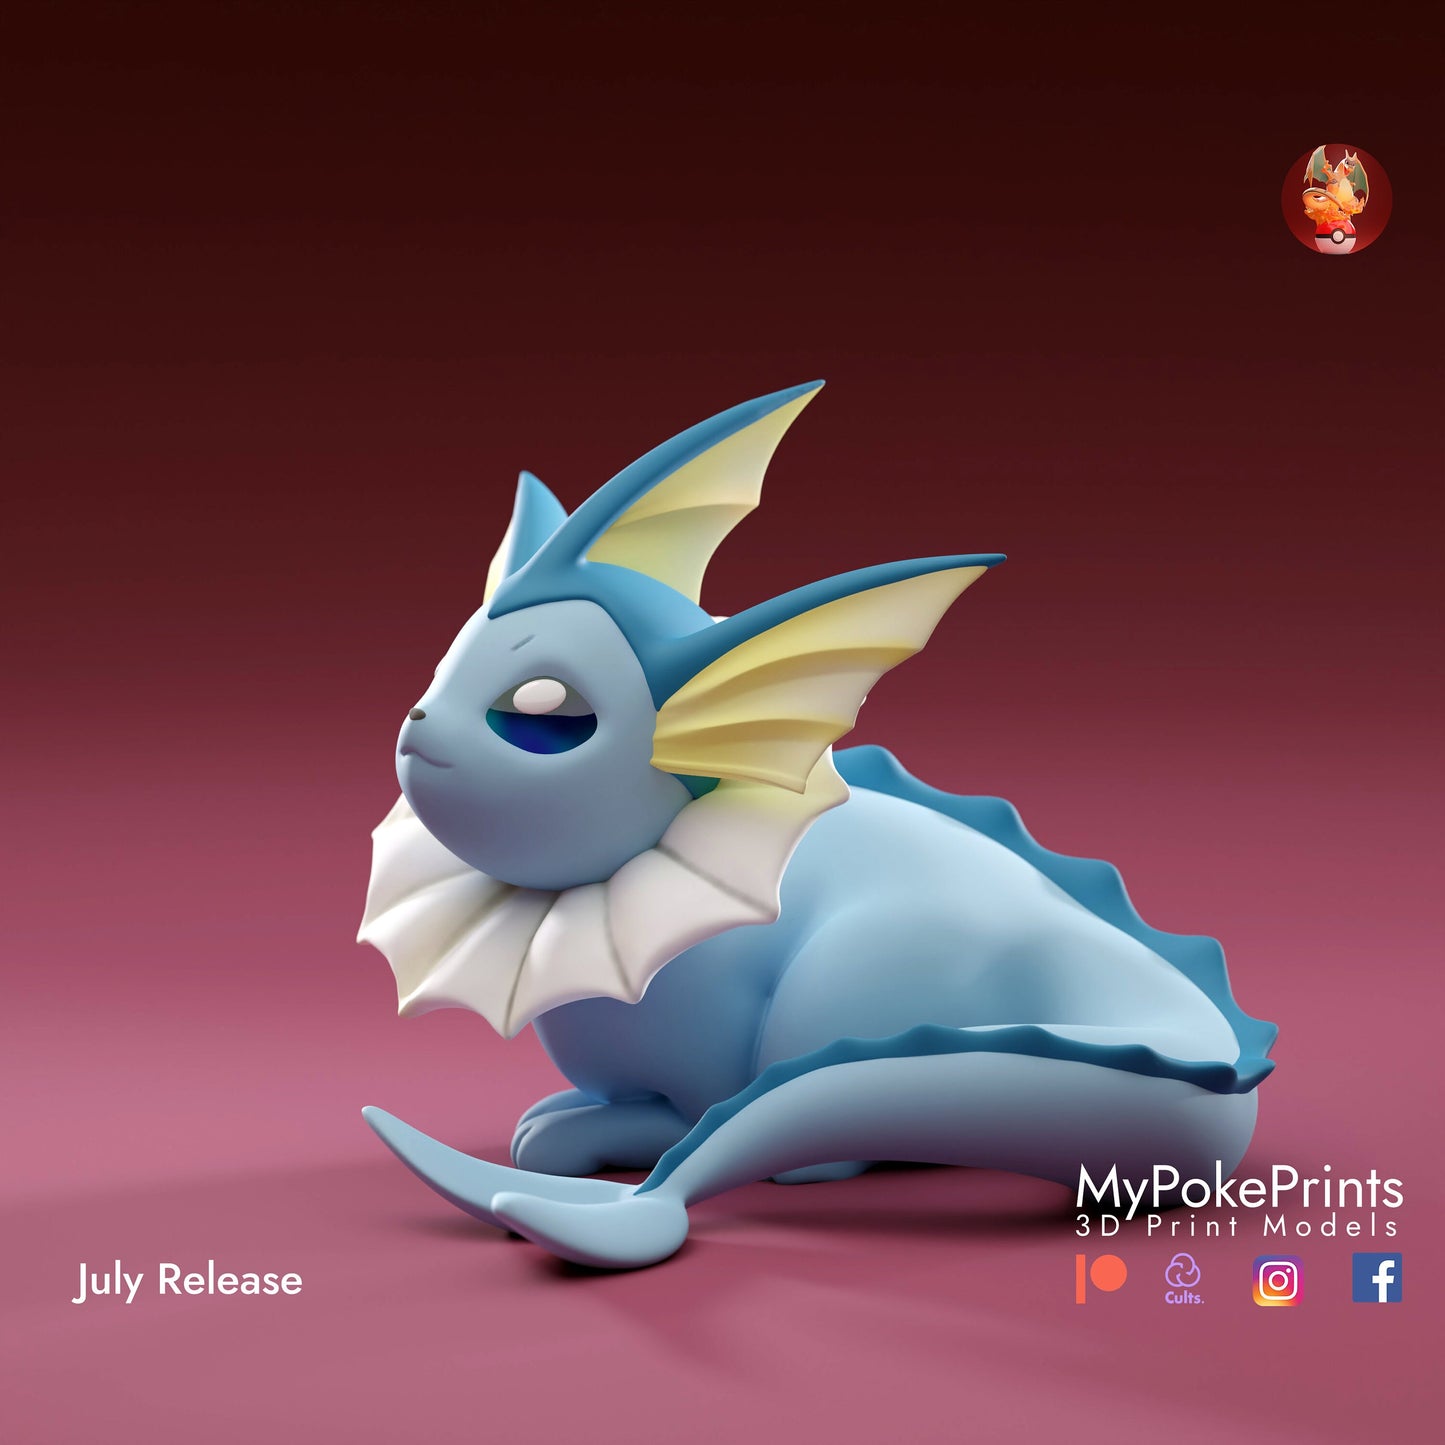 Bubble Jet Monster by MyPokePrints